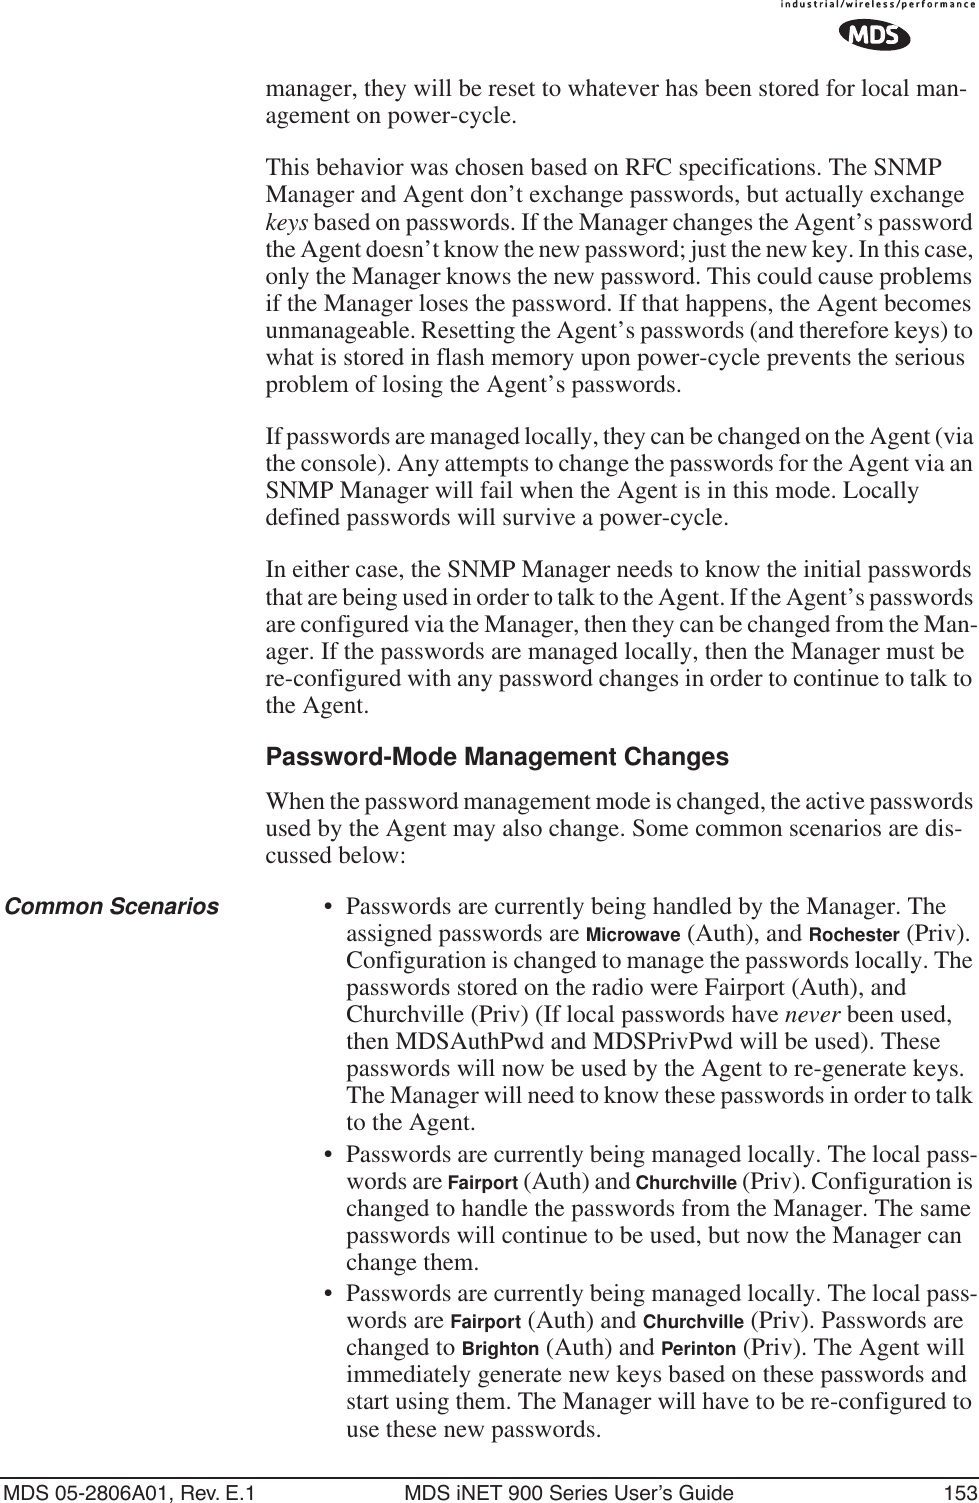 MDS 05-2806A01, Rev. E.1 MDS iNET 900 Series User’s Guide 153manager, they will be reset to whatever has been stored for local man-agement on power-cycle.This behavior was chosen based on RFC specifications. The SNMP Manager and Agent don’t exchange passwords, but actually exchange keys based on passwords. If the Manager changes the Agent’s password the Agent doesn’t know the new password; just the new key. In this case, only the Manager knows the new password. This could cause problems if the Manager loses the password. If that happens, the Agent becomes unmanageable. Resetting the Agent’s passwords (and therefore keys) to what is stored in flash memory upon power-cycle prevents the serious problem of losing the Agent’s passwords.If passwords are managed locally, they can be changed on the Agent (via the console). Any attempts to change the passwords for the Agent via an SNMP Manager will fail when the Agent is in this mode. Locally defined passwords will survive a power-cycle.In either case, the SNMP Manager needs to know the initial passwords that are being used in order to talk to the Agent. If the Agent’s passwords are configured via the Manager, then they can be changed from the Man-ager. If the passwords are managed locally, then the Manager must be re-configured with any password changes in order to continue to talk to the Agent.Password-Mode Management ChangesWhen the password management mode is changed, the active passwords used by the Agent may also change. Some common scenarios are dis-cussed below:Common Scenarios • Passwords are currently being handled by the Manager. The assigned passwords are Microwave (Auth), and Rochester (Priv). Configuration is changed to manage the passwords locally. The passwords stored on the radio were Fairport (Auth), and Churchville (Priv) (If local passwords have never been used, then MDSAuthPwd and MDSPrivPwd will be used). These passwords will now be used by the Agent to re-generate keys. The Manager will need to know these passwords in order to talk to the Agent.•Passwords are currently being managed locally. The local pass-words are Fairport (Auth) and Churchville (Priv). Configuration is changed to handle the passwords from the Manager. The same passwords will continue to be used, but now the Manager can change them.•Passwords are currently being managed locally. The local pass-words are Fairport (Auth) and Churchville (Priv). Passwords are changed to Brighton (Auth) and Perinton (Priv). The Agent will immediately generate new keys based on these passwords and start using them. The Manager will have to be re-configured to use these new passwords.